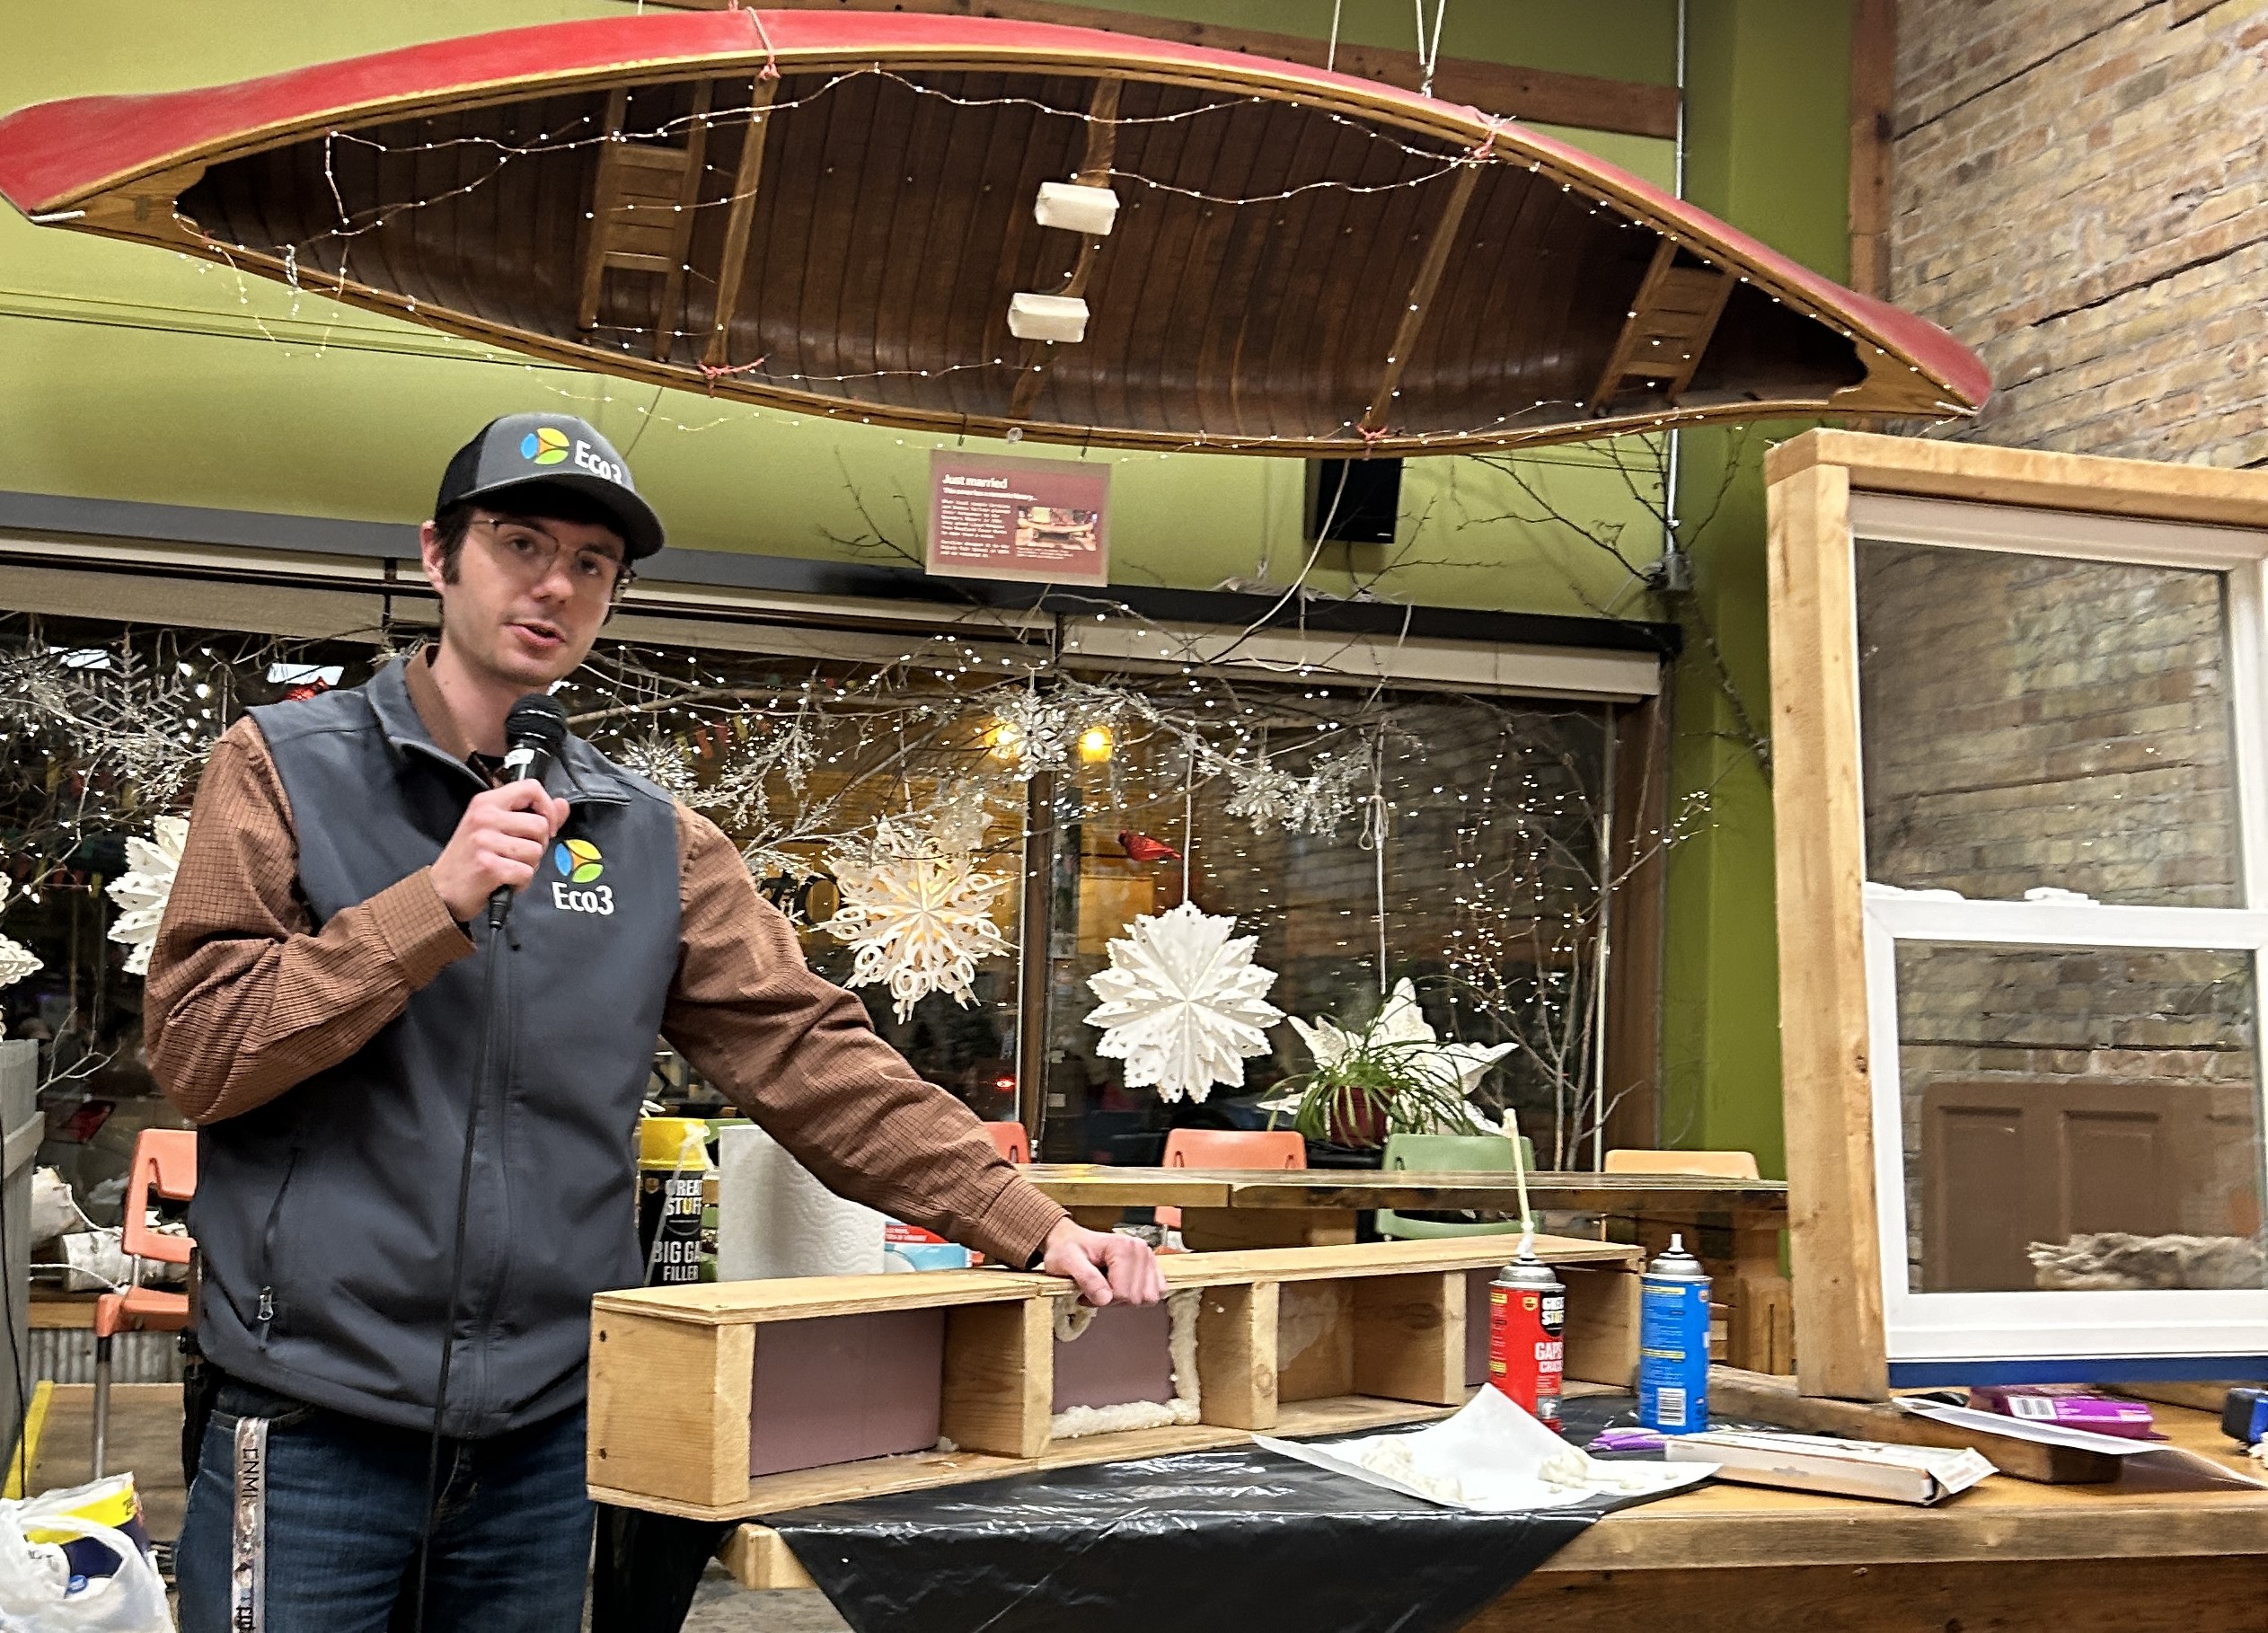 Person with Eco3 hat and vest speaks into a microphone while leaning on a table with demonstration materials on it.